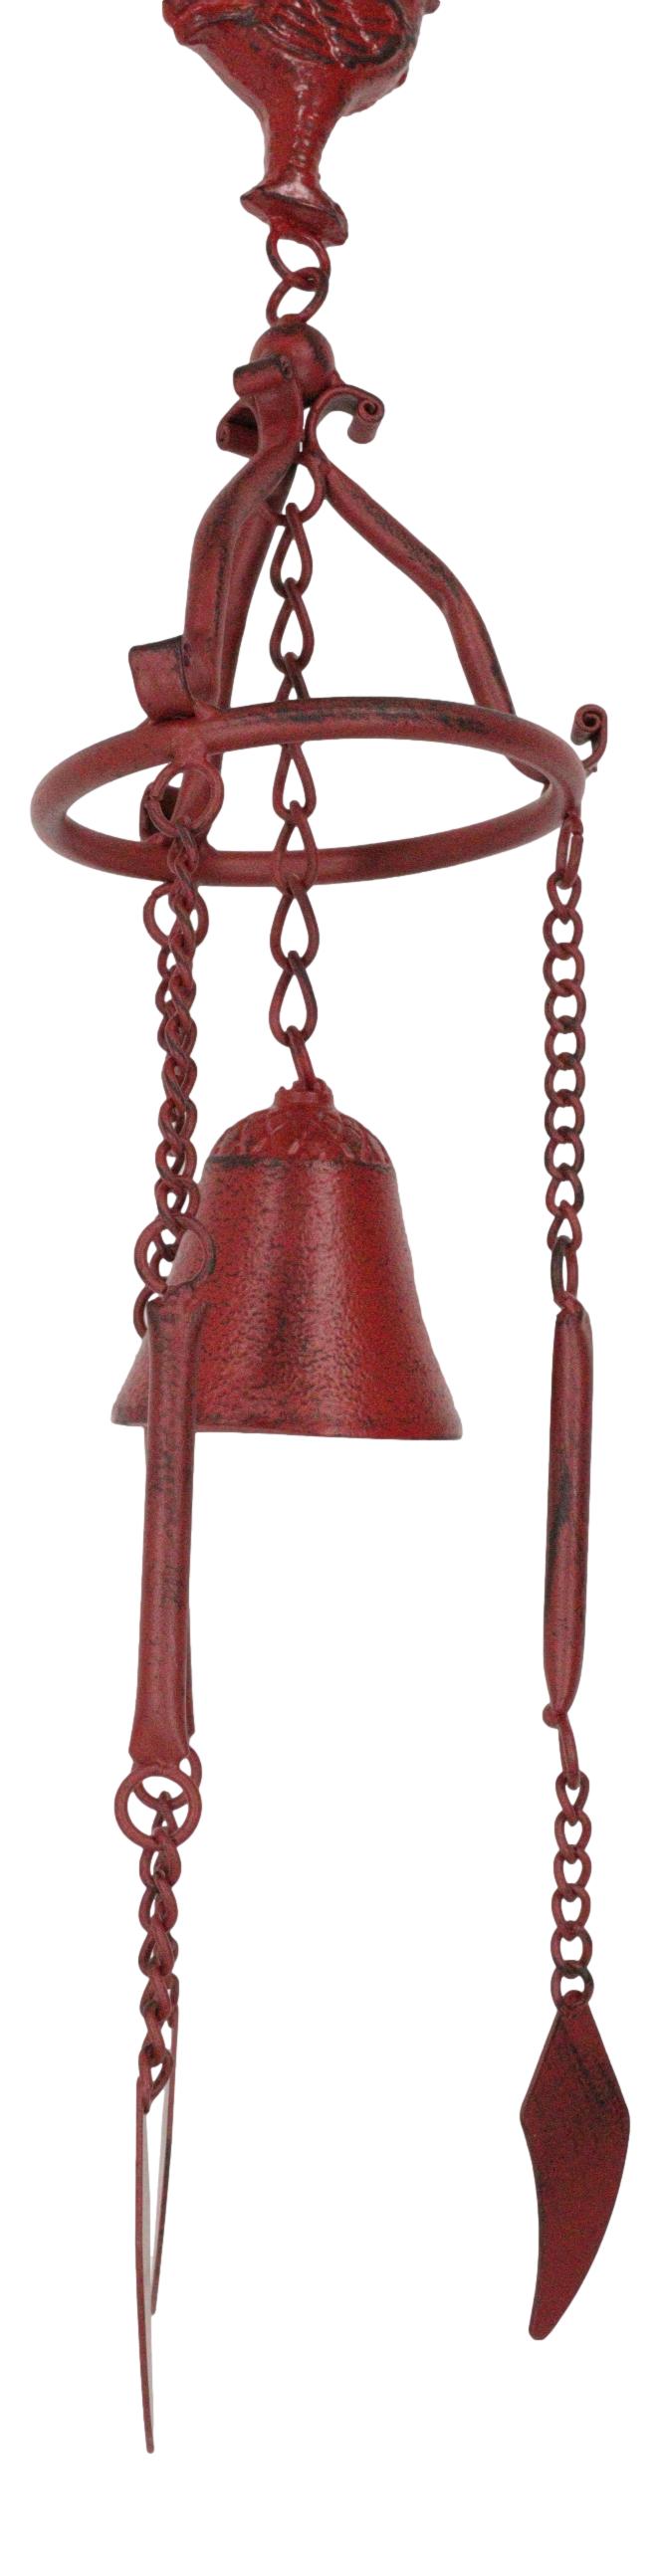 Cast Iron Rustic Red Chicken Rooster Hanging Garden Patio Bell Wind Chime Decor